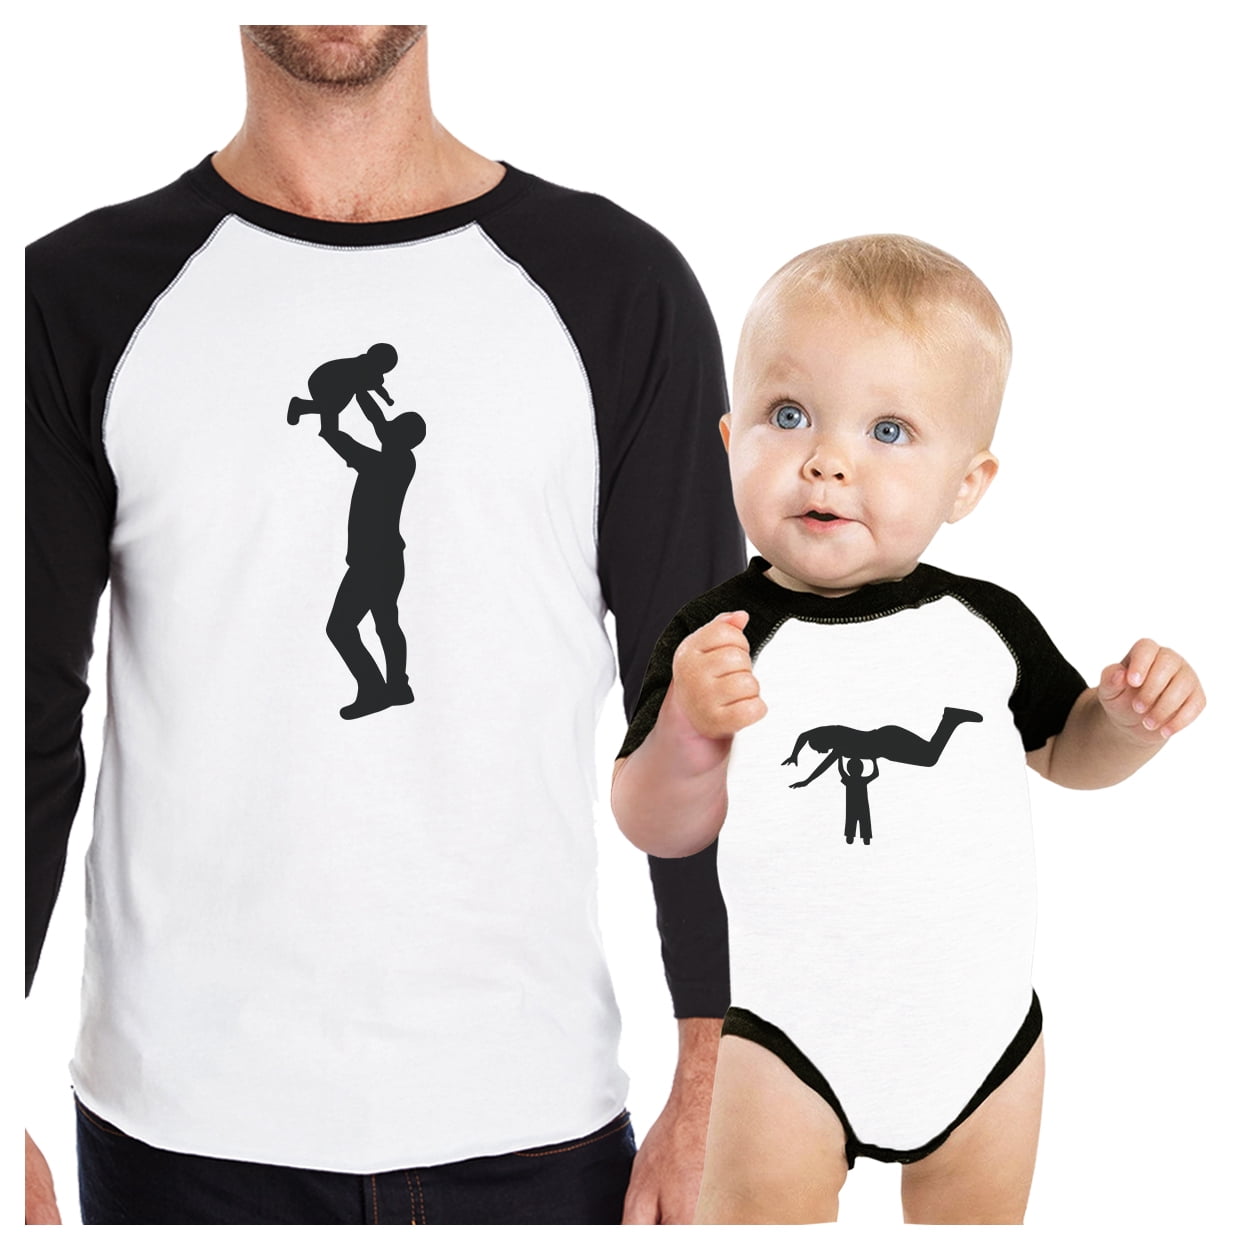 FATHER AND BABY SET T-SHIRT AND BODYSUIT SET DAD AND SON WORK HARD PLAY HARD SET 